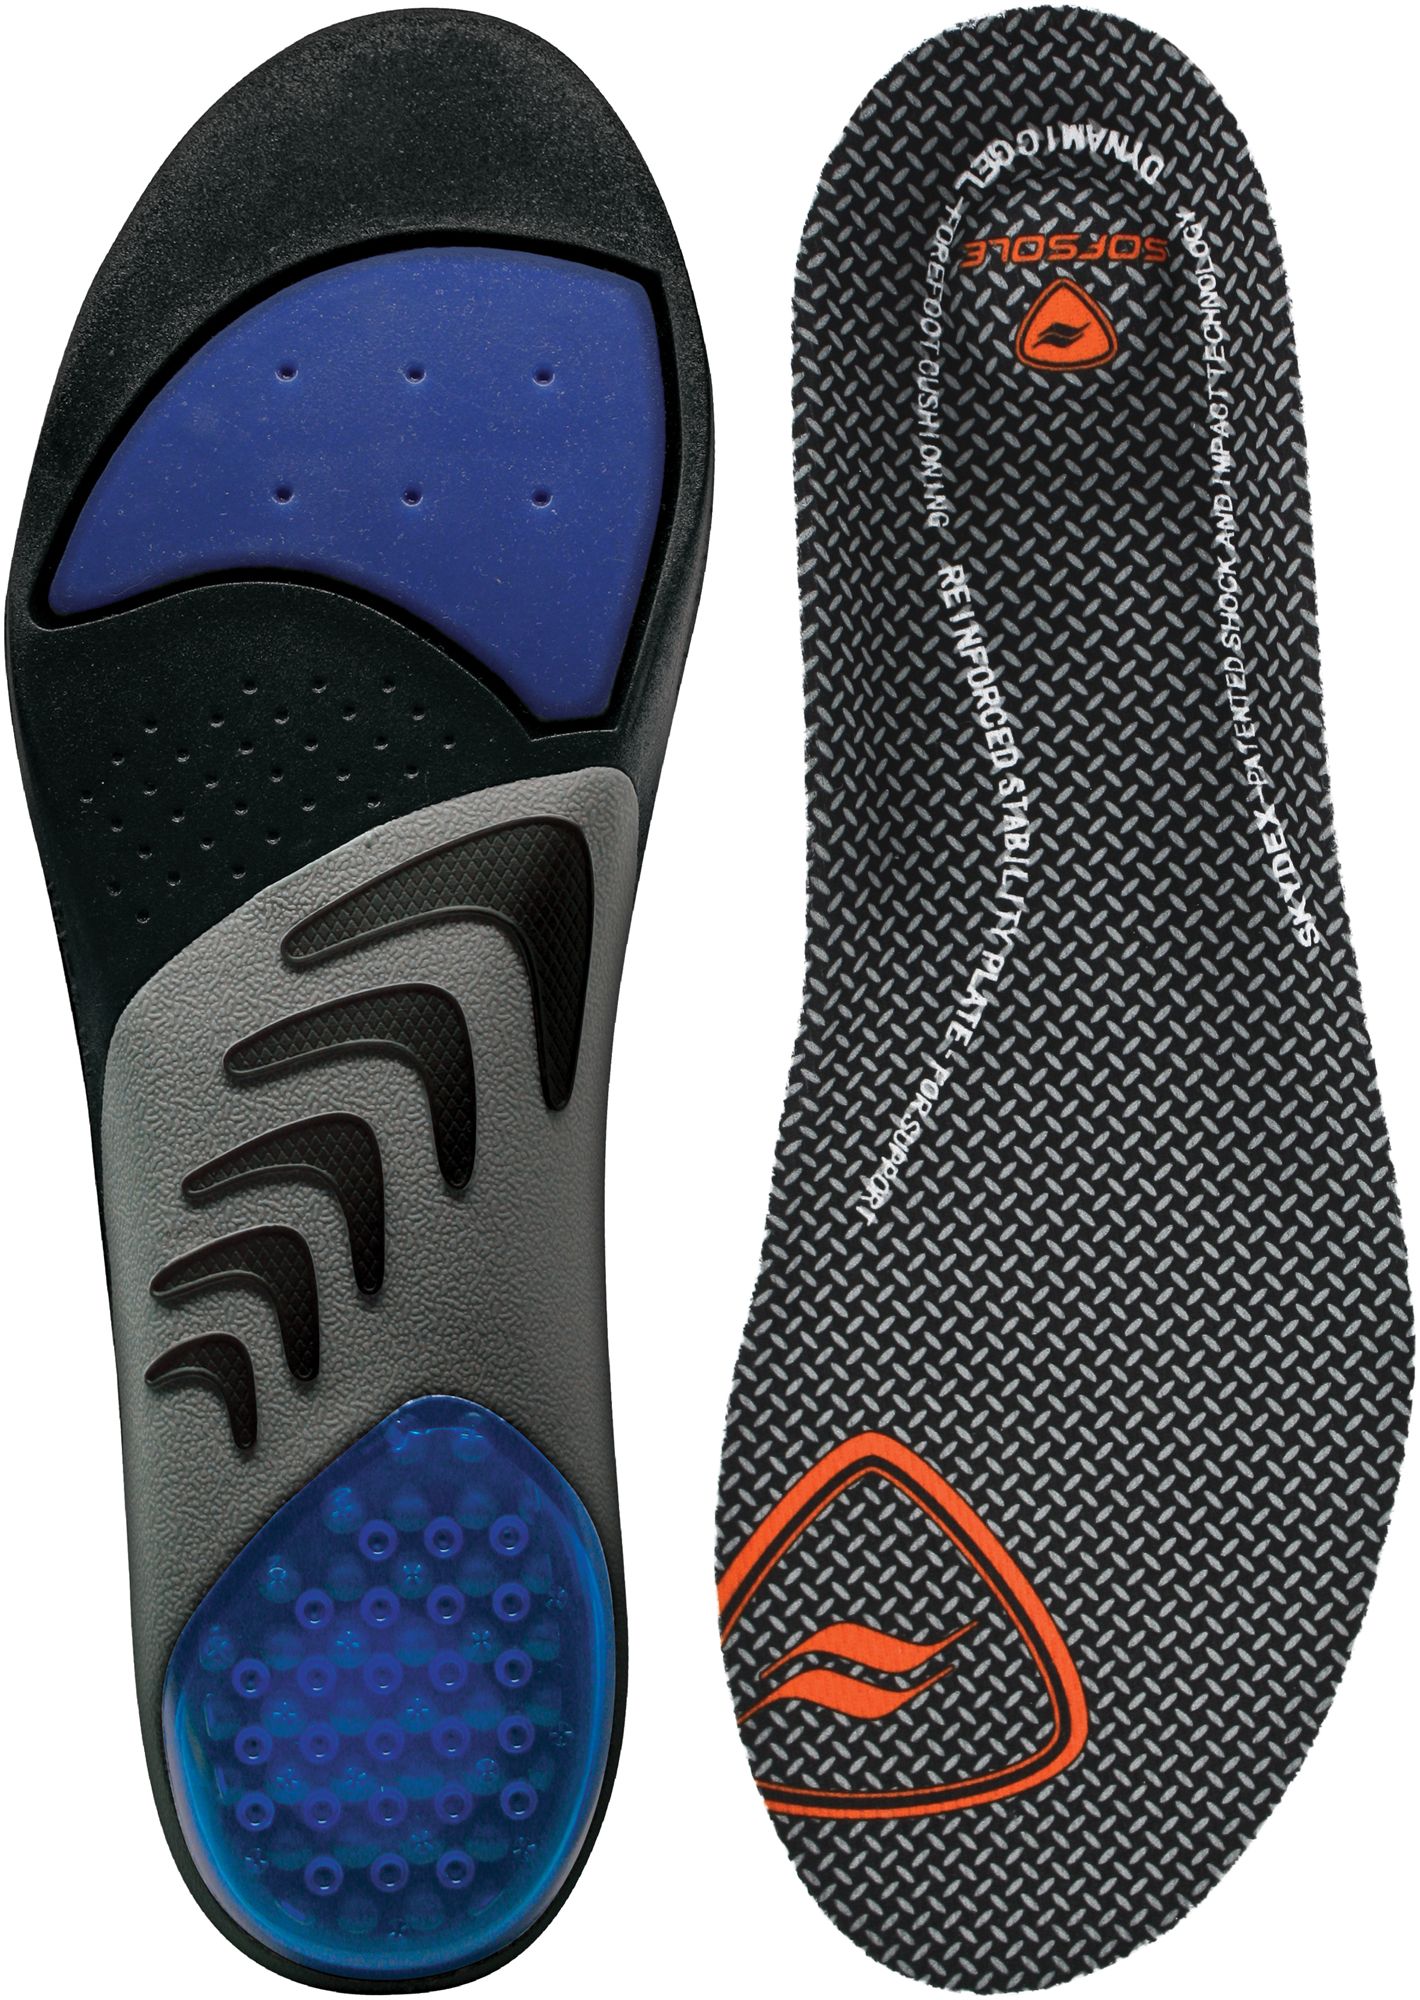 Sof Sole Airr Orthotic Insole | DICK'S 